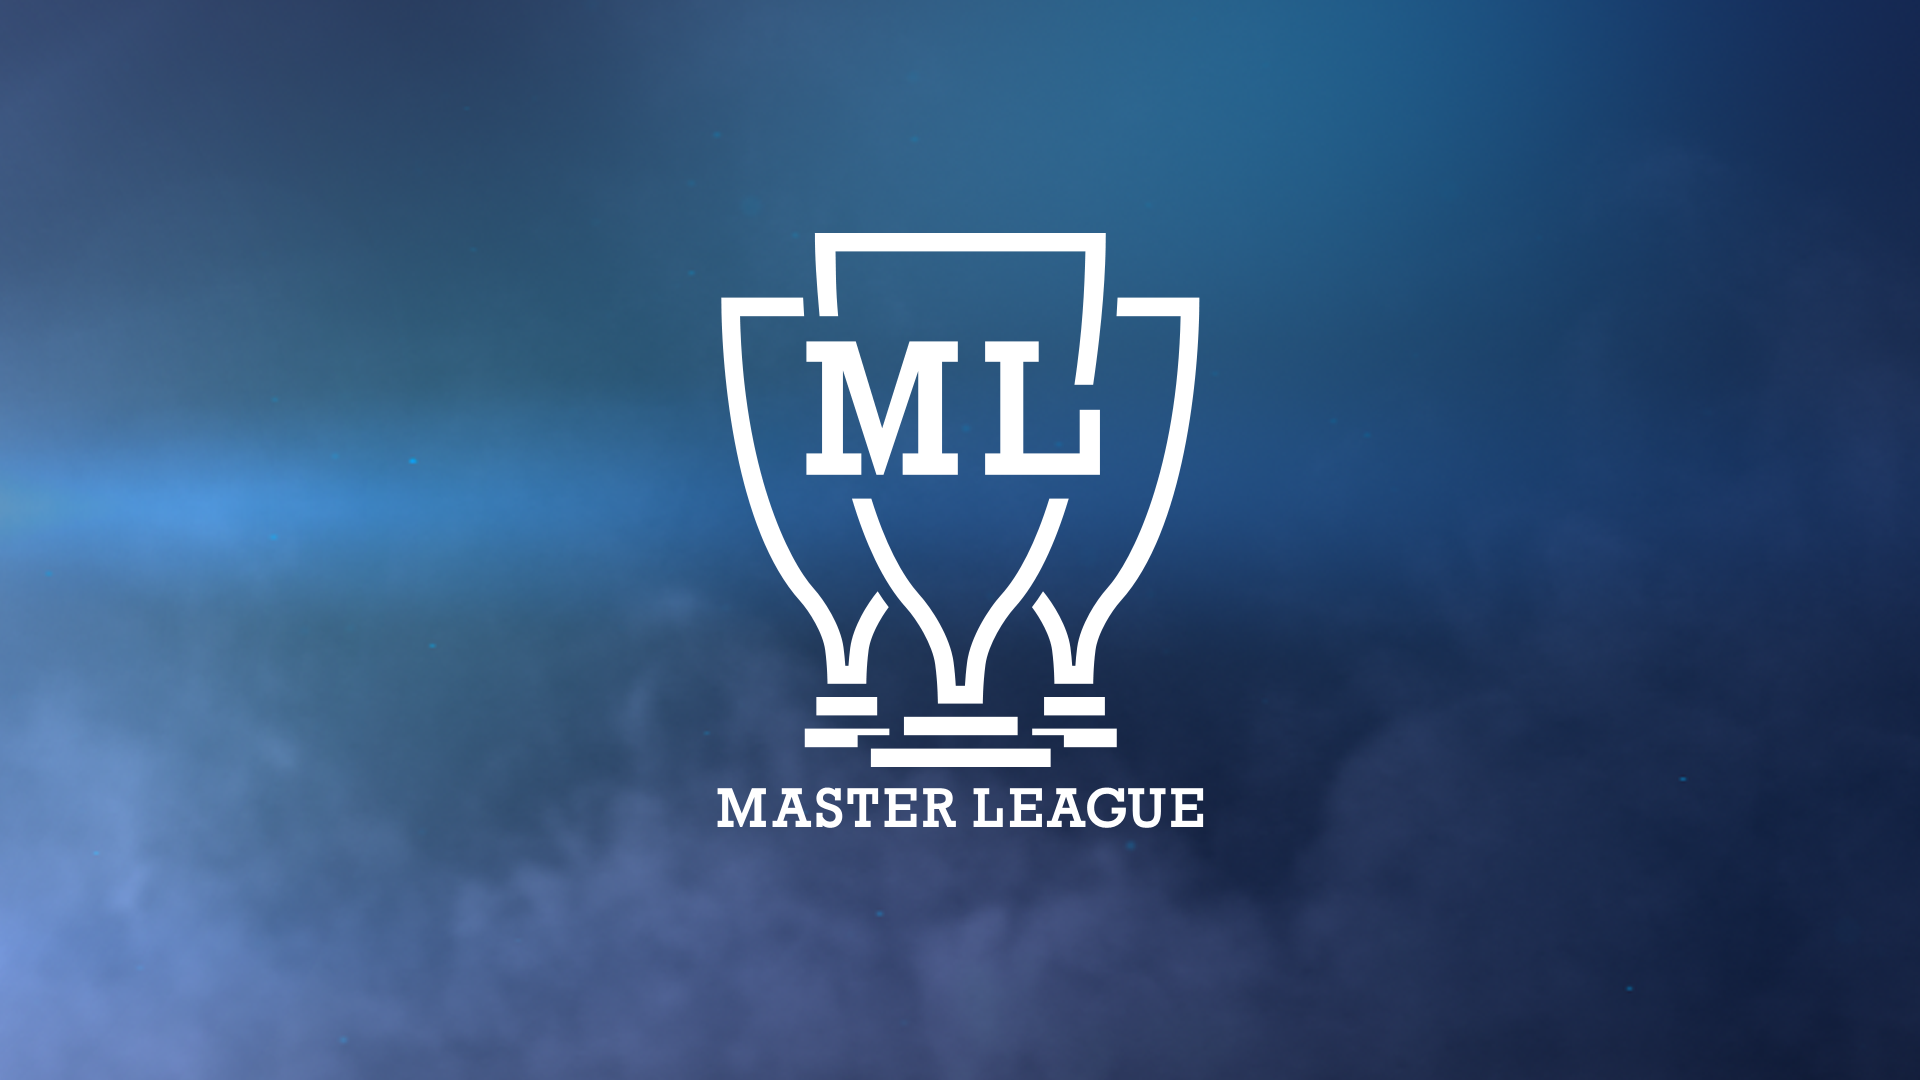 First Glory: Master League